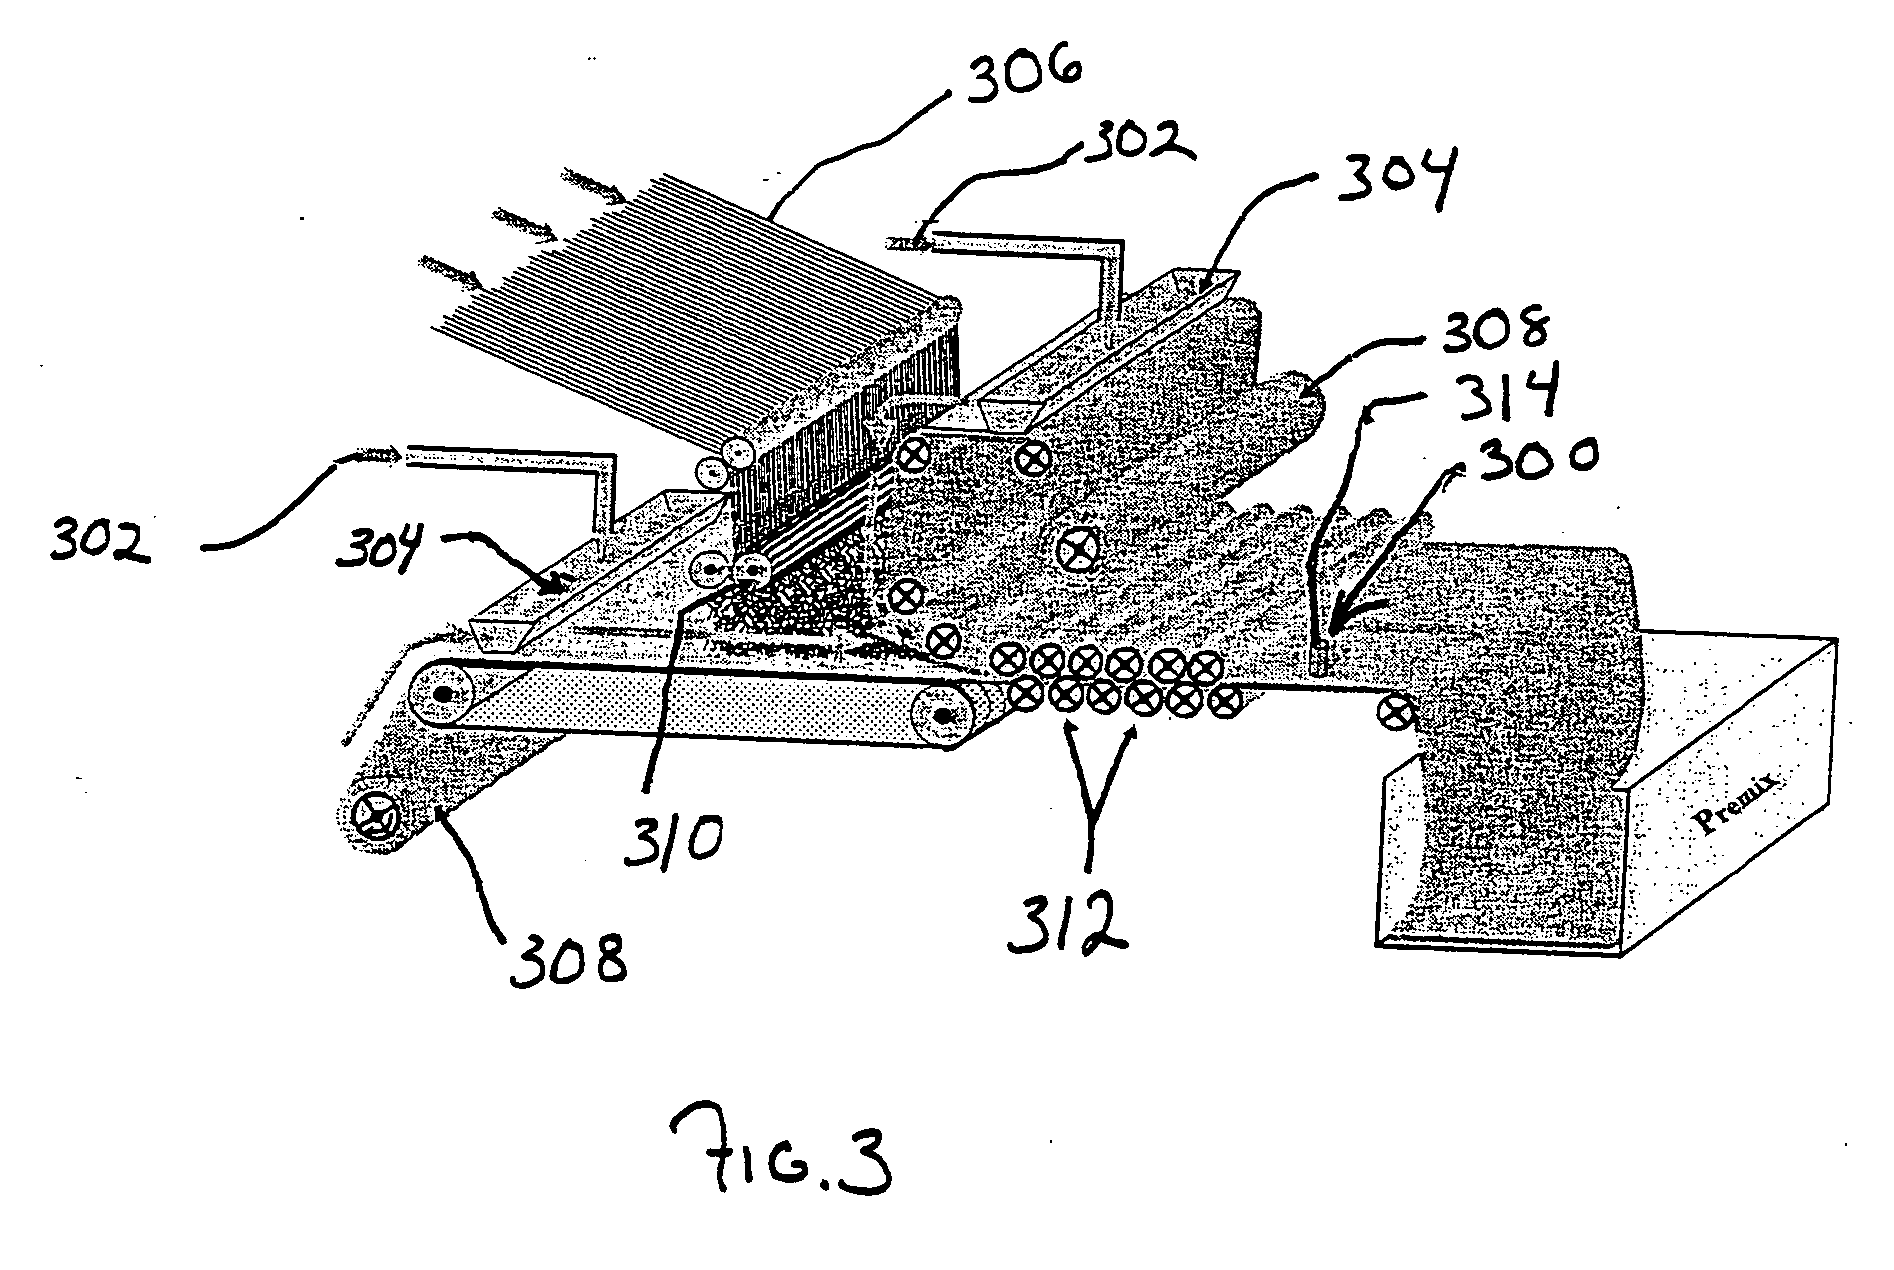 Molding compounds for use in furnace blower housings and blower housings molded from these compounds